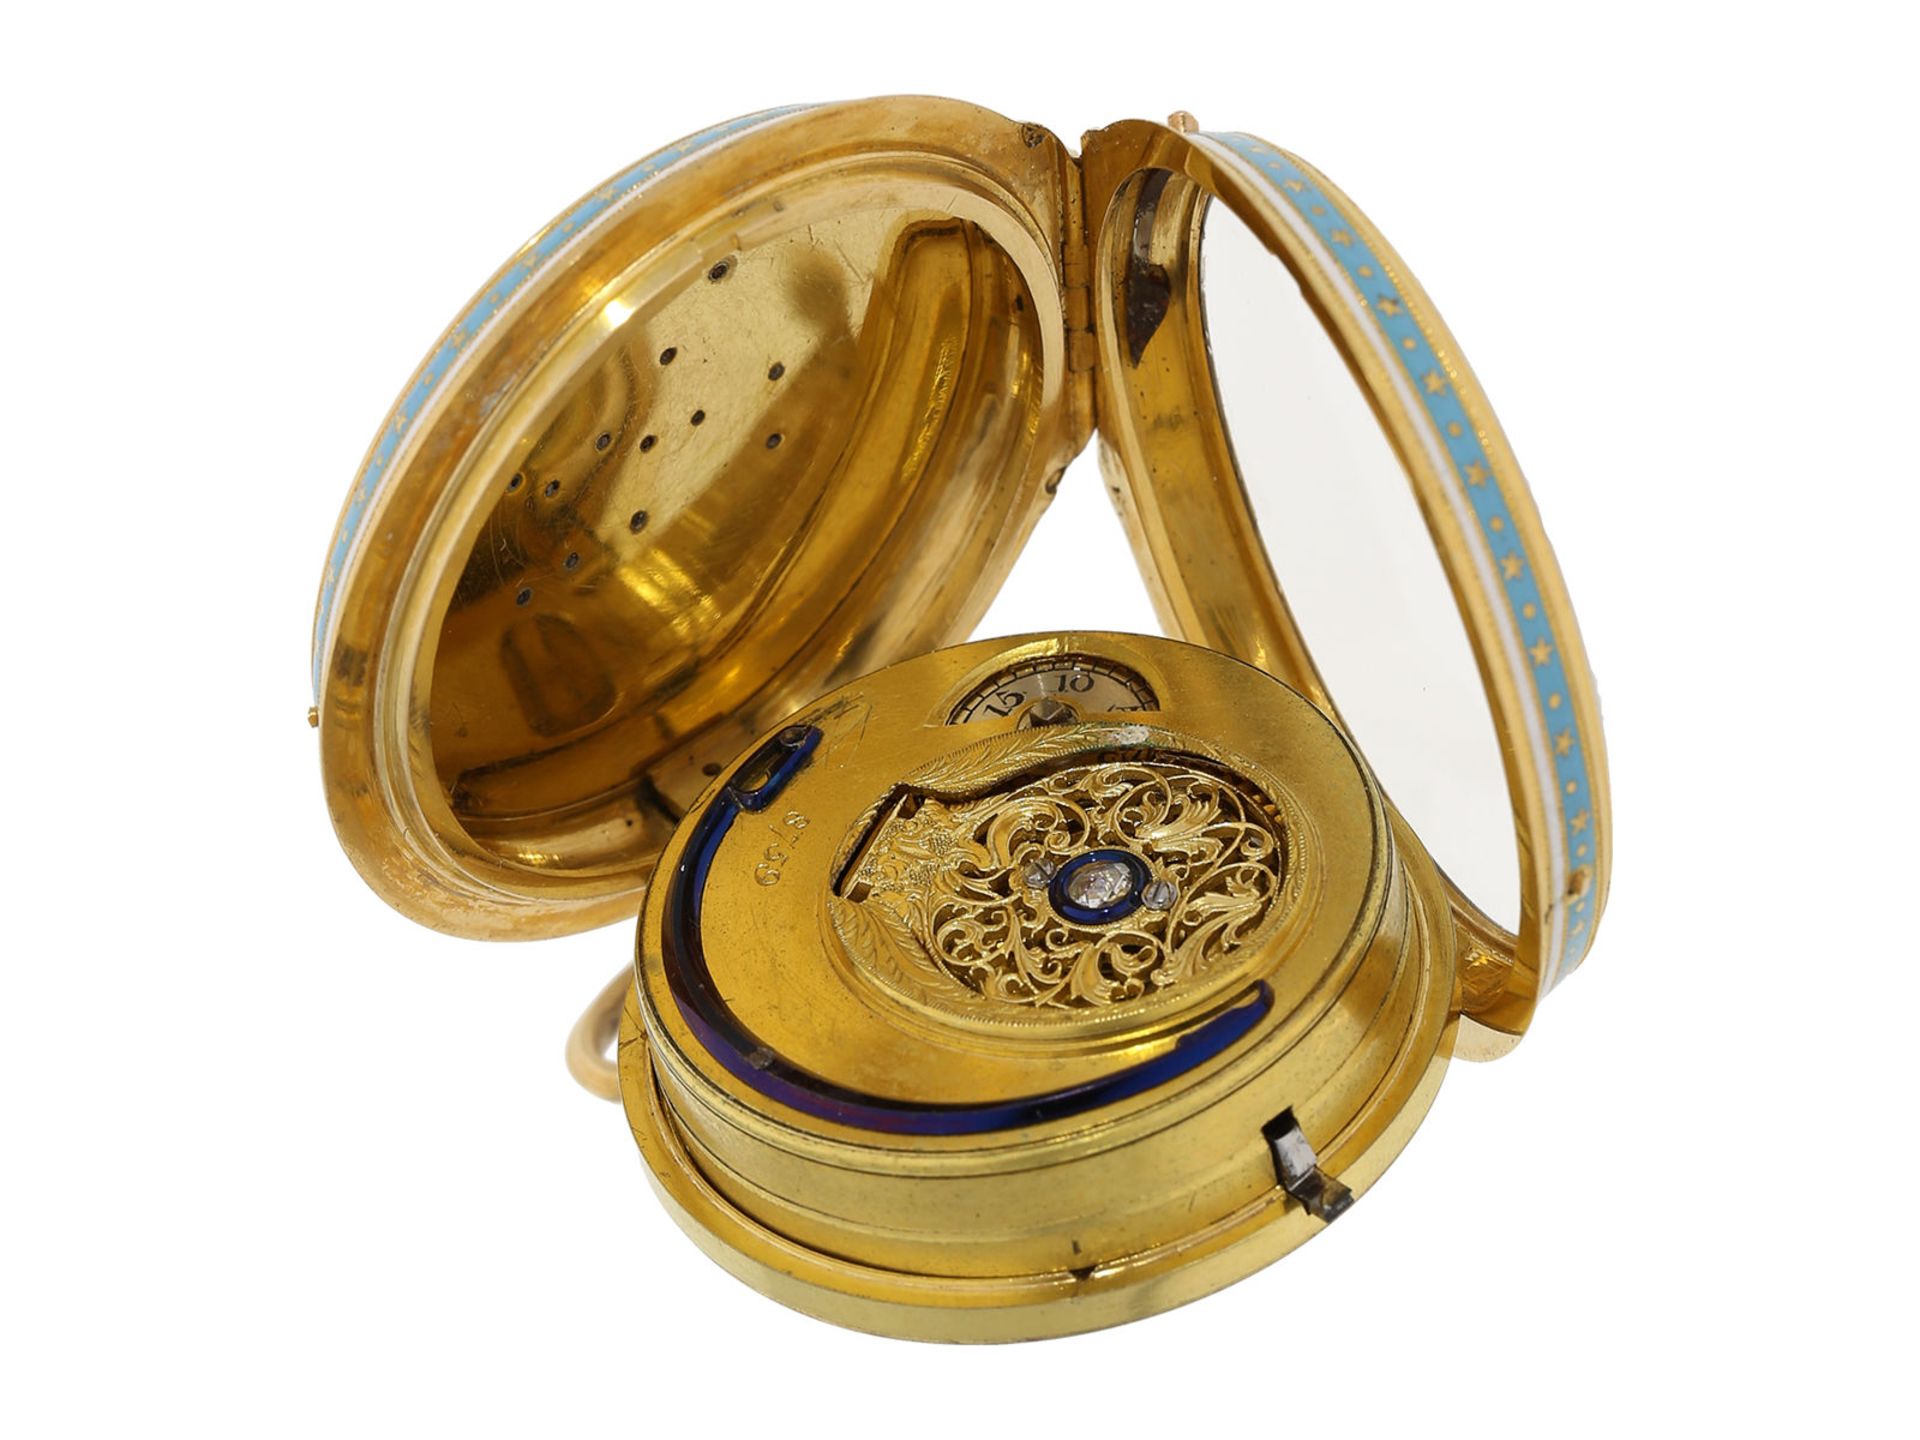 Pocket watch: exquisite gold/ enamel pocket watch with early cylinder escapement and diamond - Bild 4 aus 6